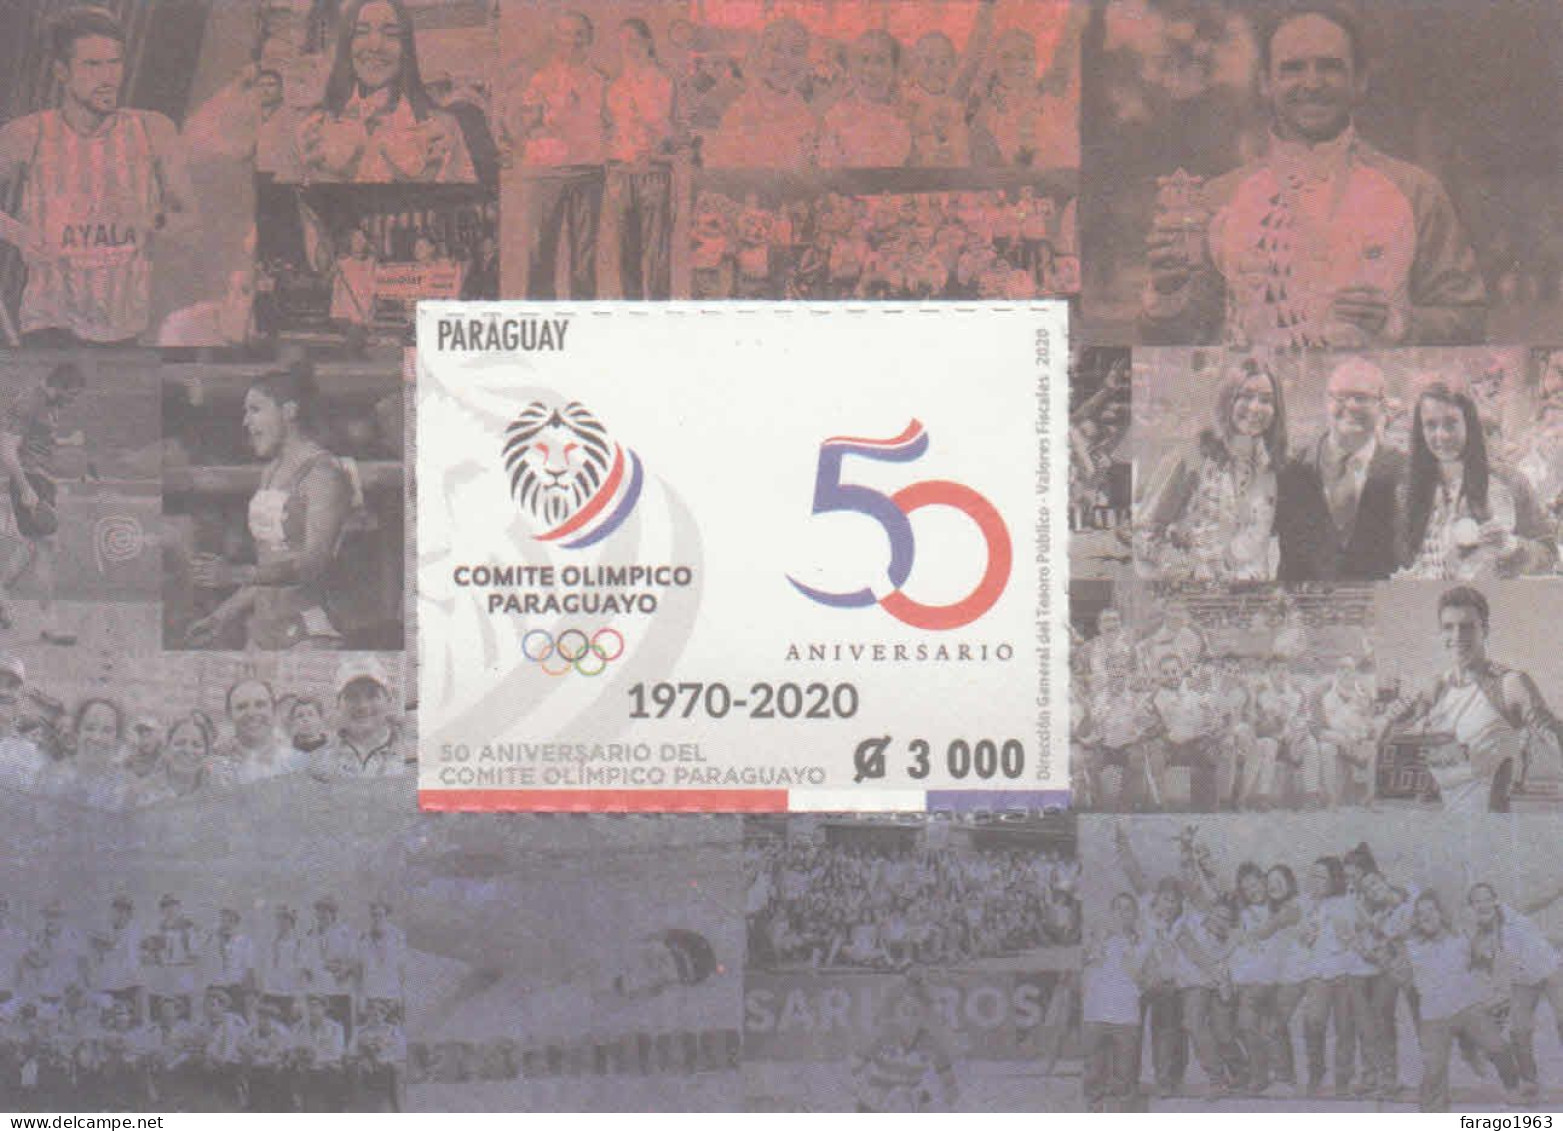 2020 Paraguay Olympic Committee Olympics Souvenir Sheet MNH - Paraguay